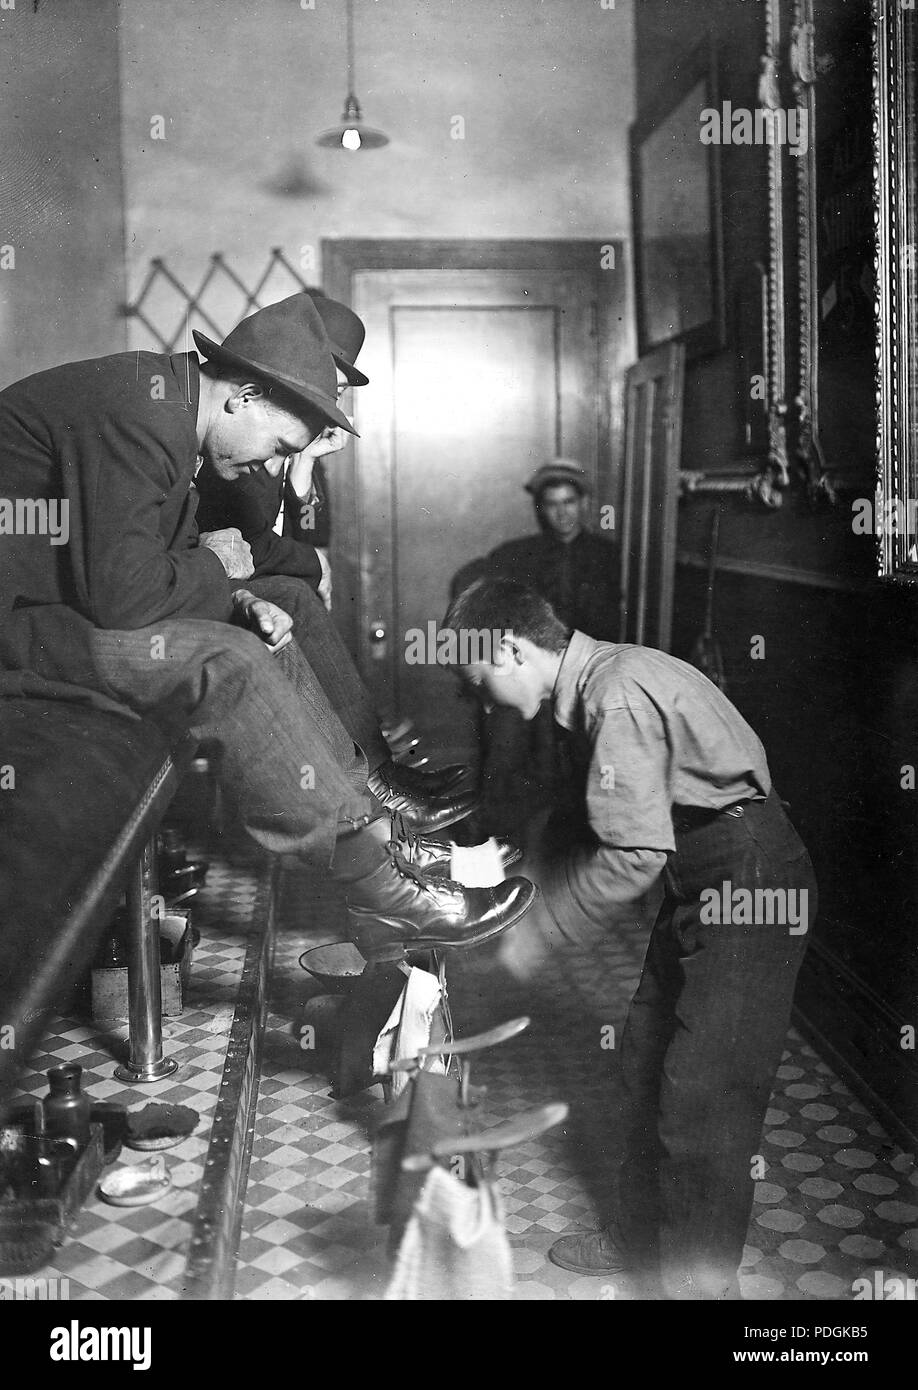 Greel's Shoe-Shining Parlor. Said he was 15 years old. Works some nights until 11 P.M. Indianapolis, Ind, August 1908 Stock Photo